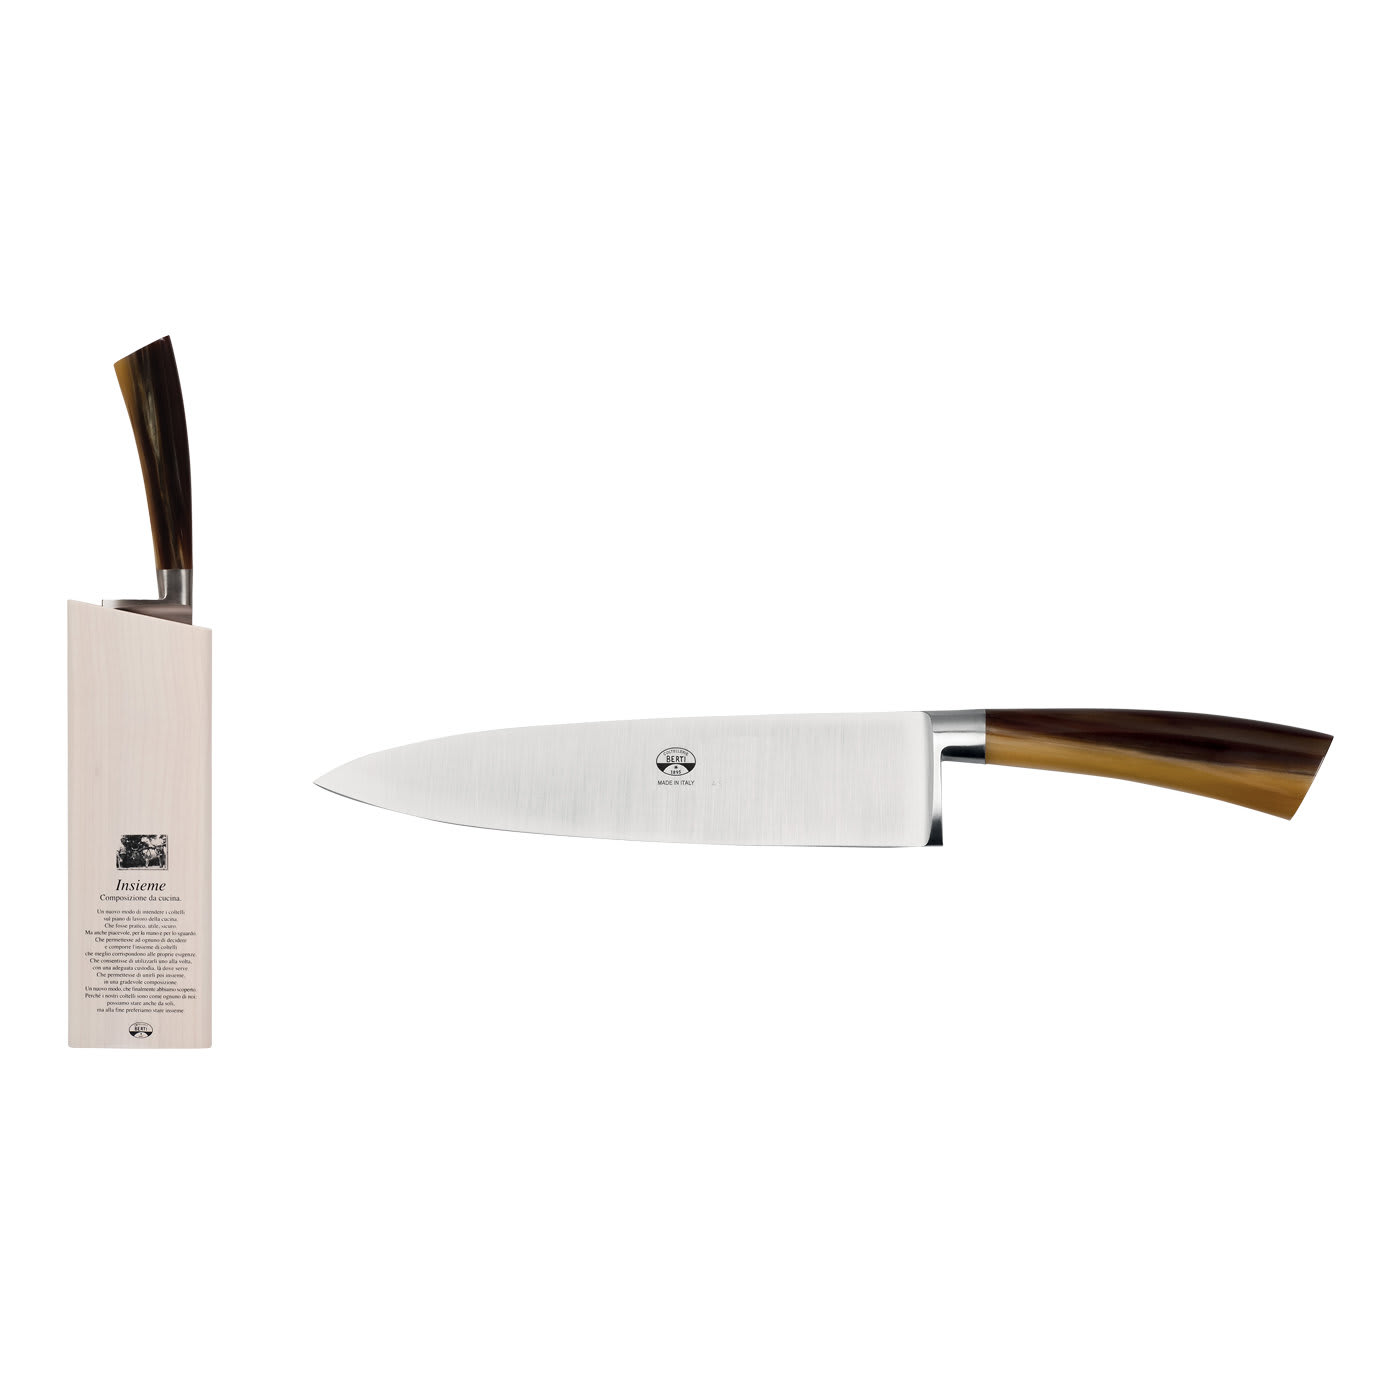 Insieme Set of Block and Carving Knife with Cornthech Handle - Coltellerie Berti